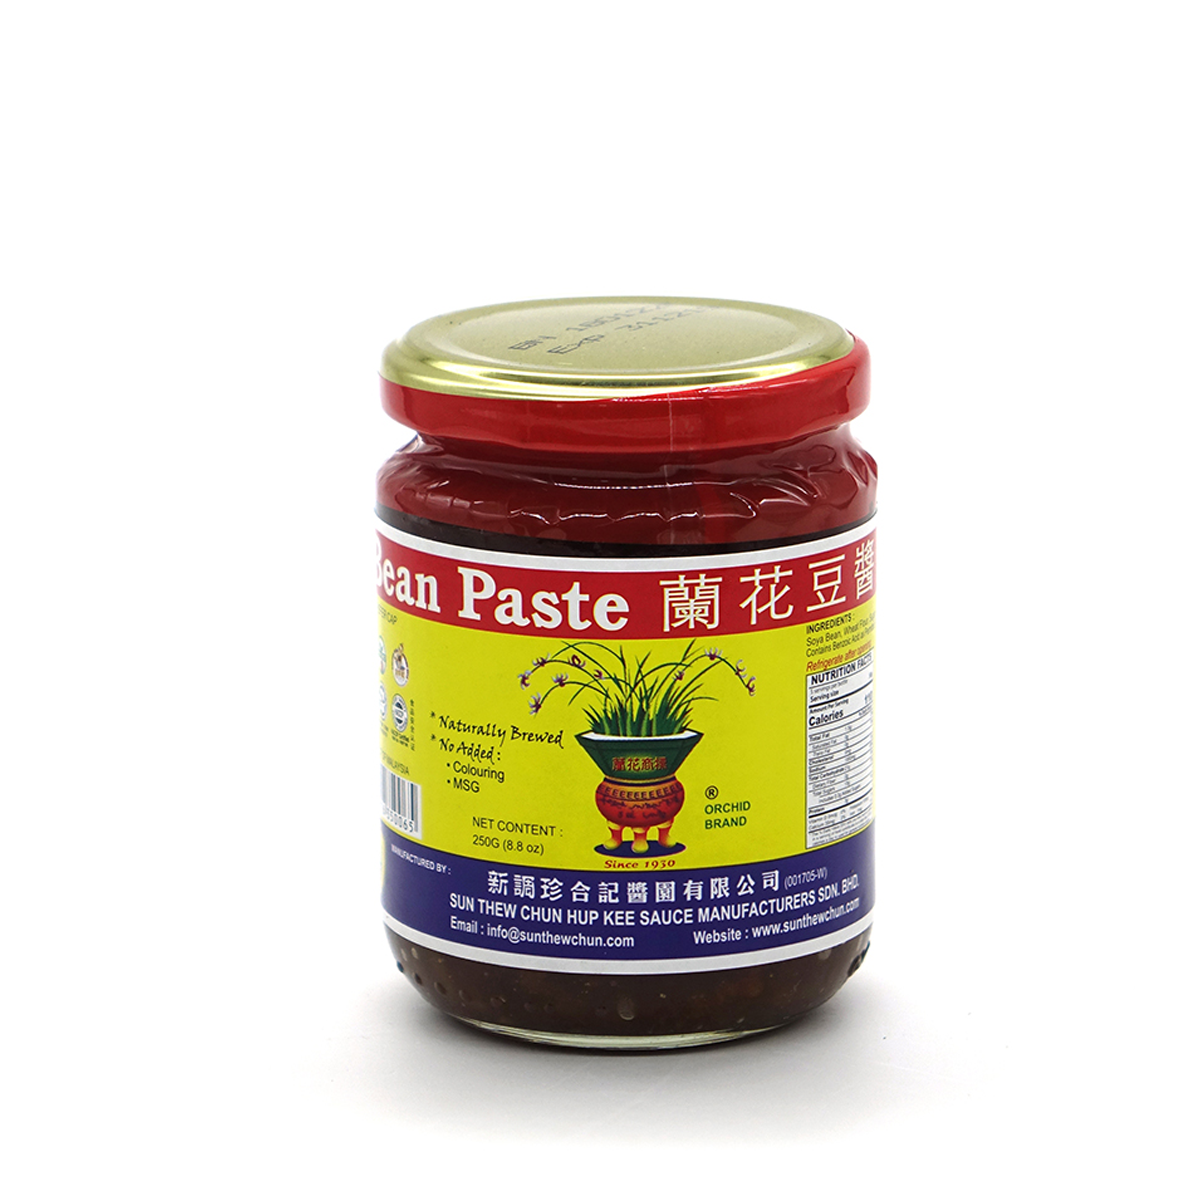 Orchid Brand Bean Paste (Whole)